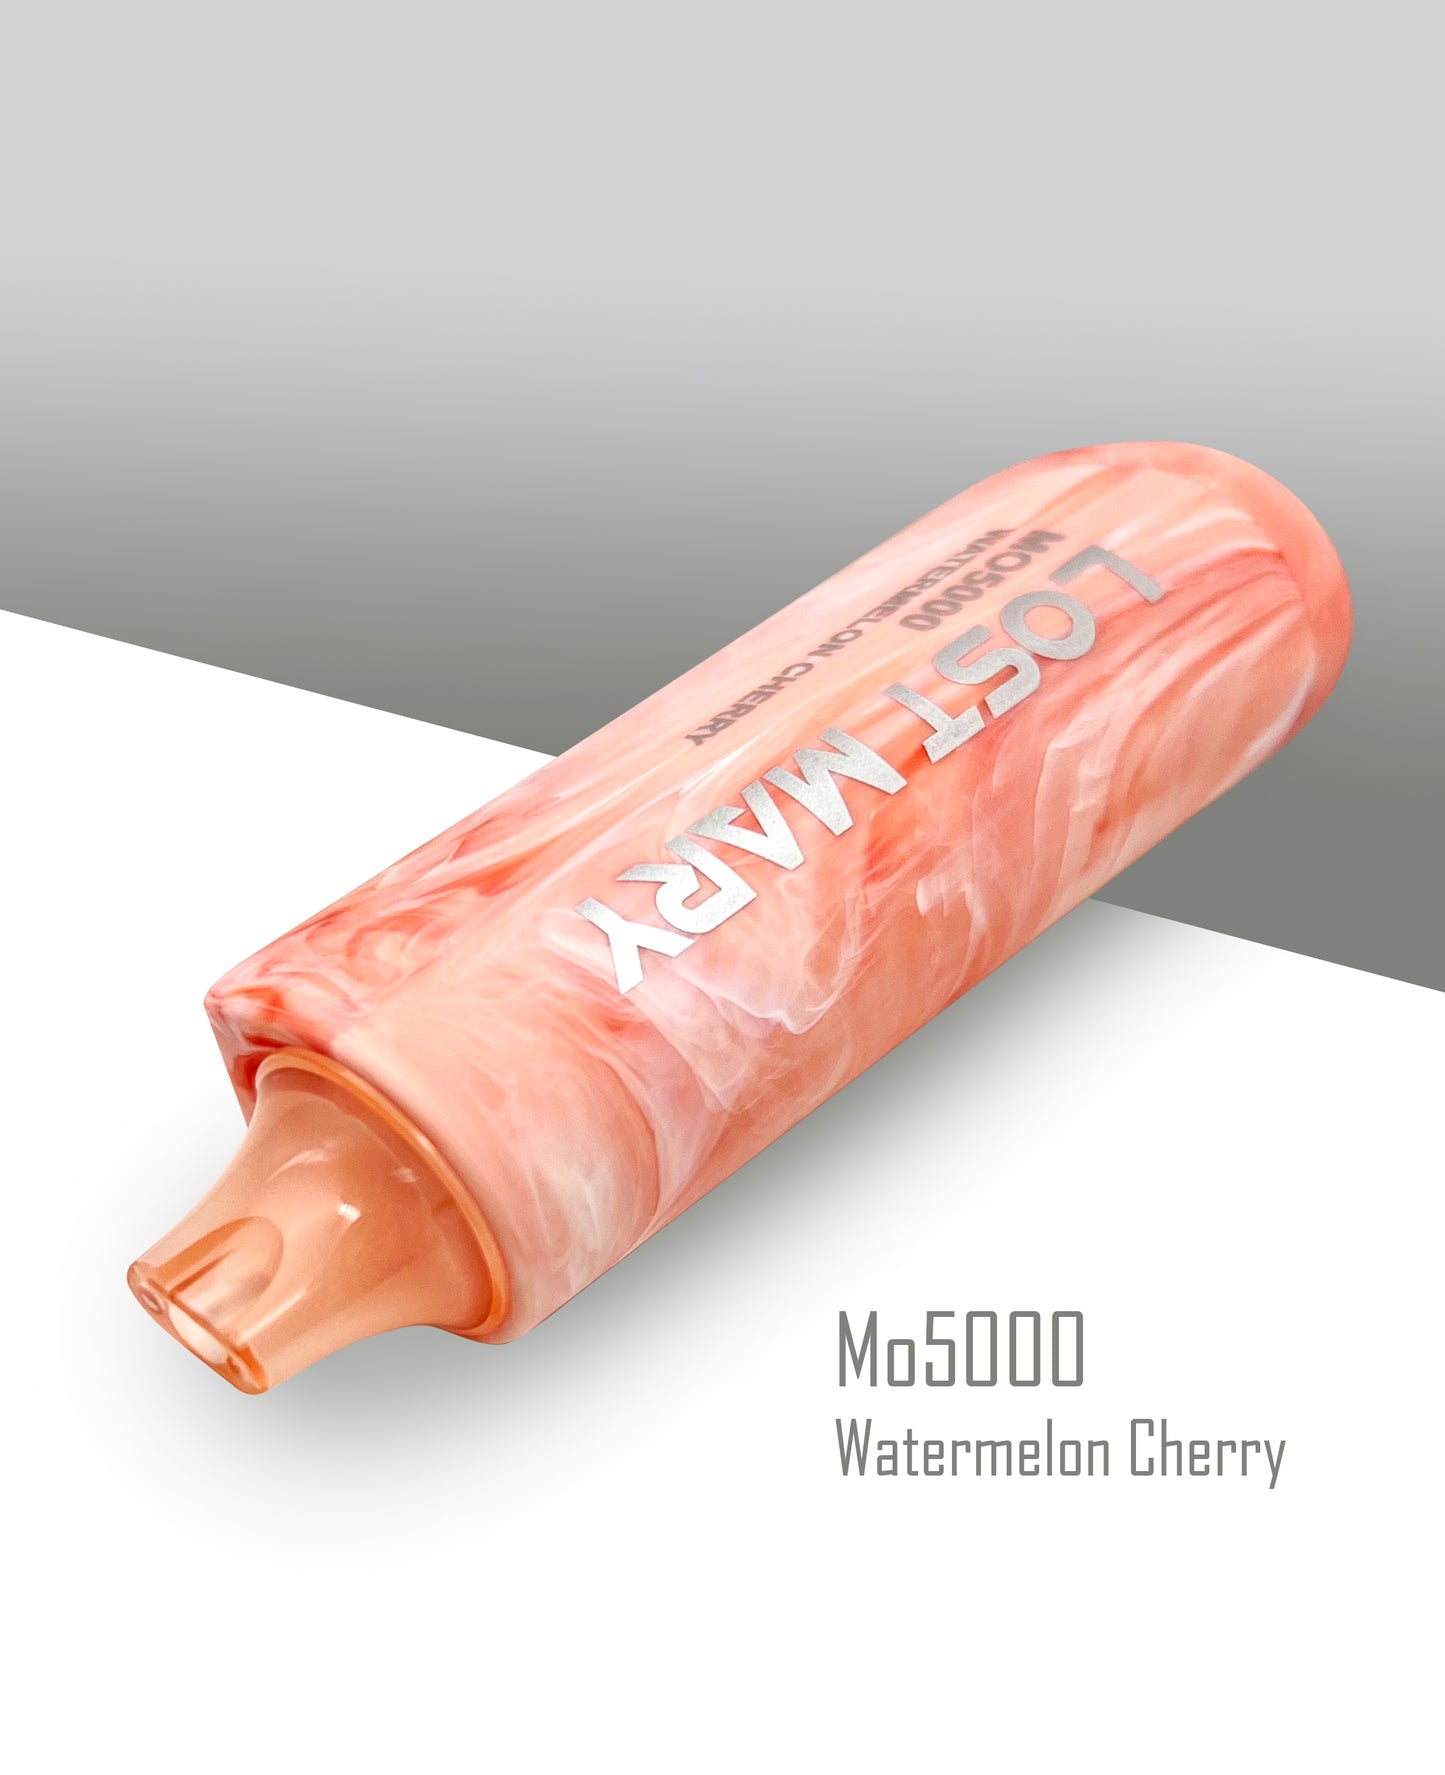 Vape Central Wholesale| Lost Marry Mo5000 | Disposable vape wholesale| Lost Mary MO5000 vape wholesale| lost mary mo5000 flavor watermelon cherry